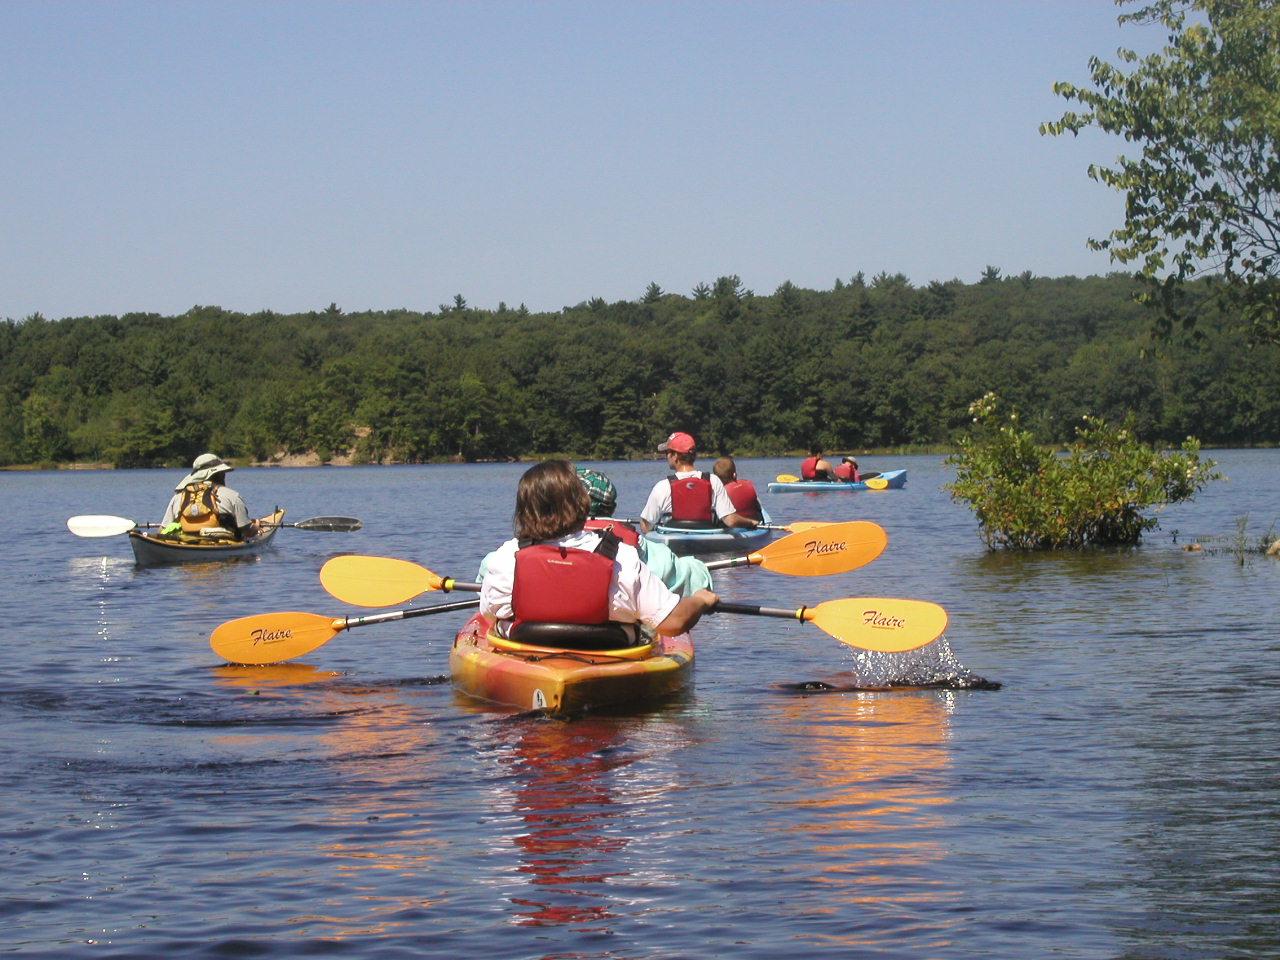 A group of tandem kayakers head out on a large body of water surrounded by trees.